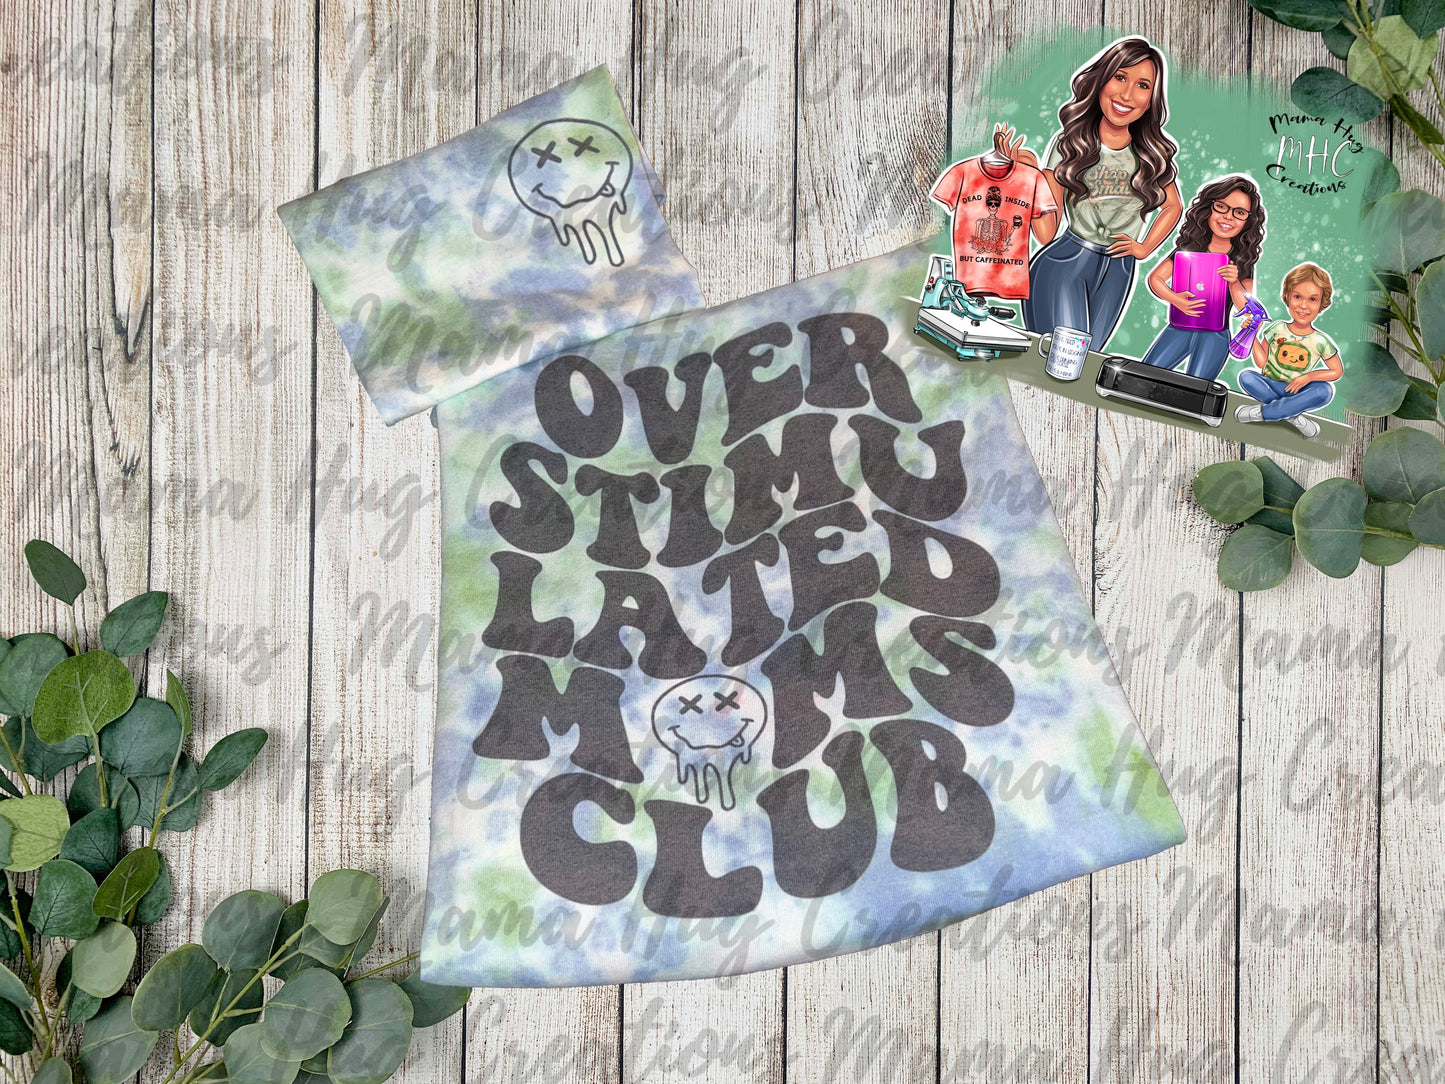 Overstimulated Moms Club Tie Dye T-Shirt